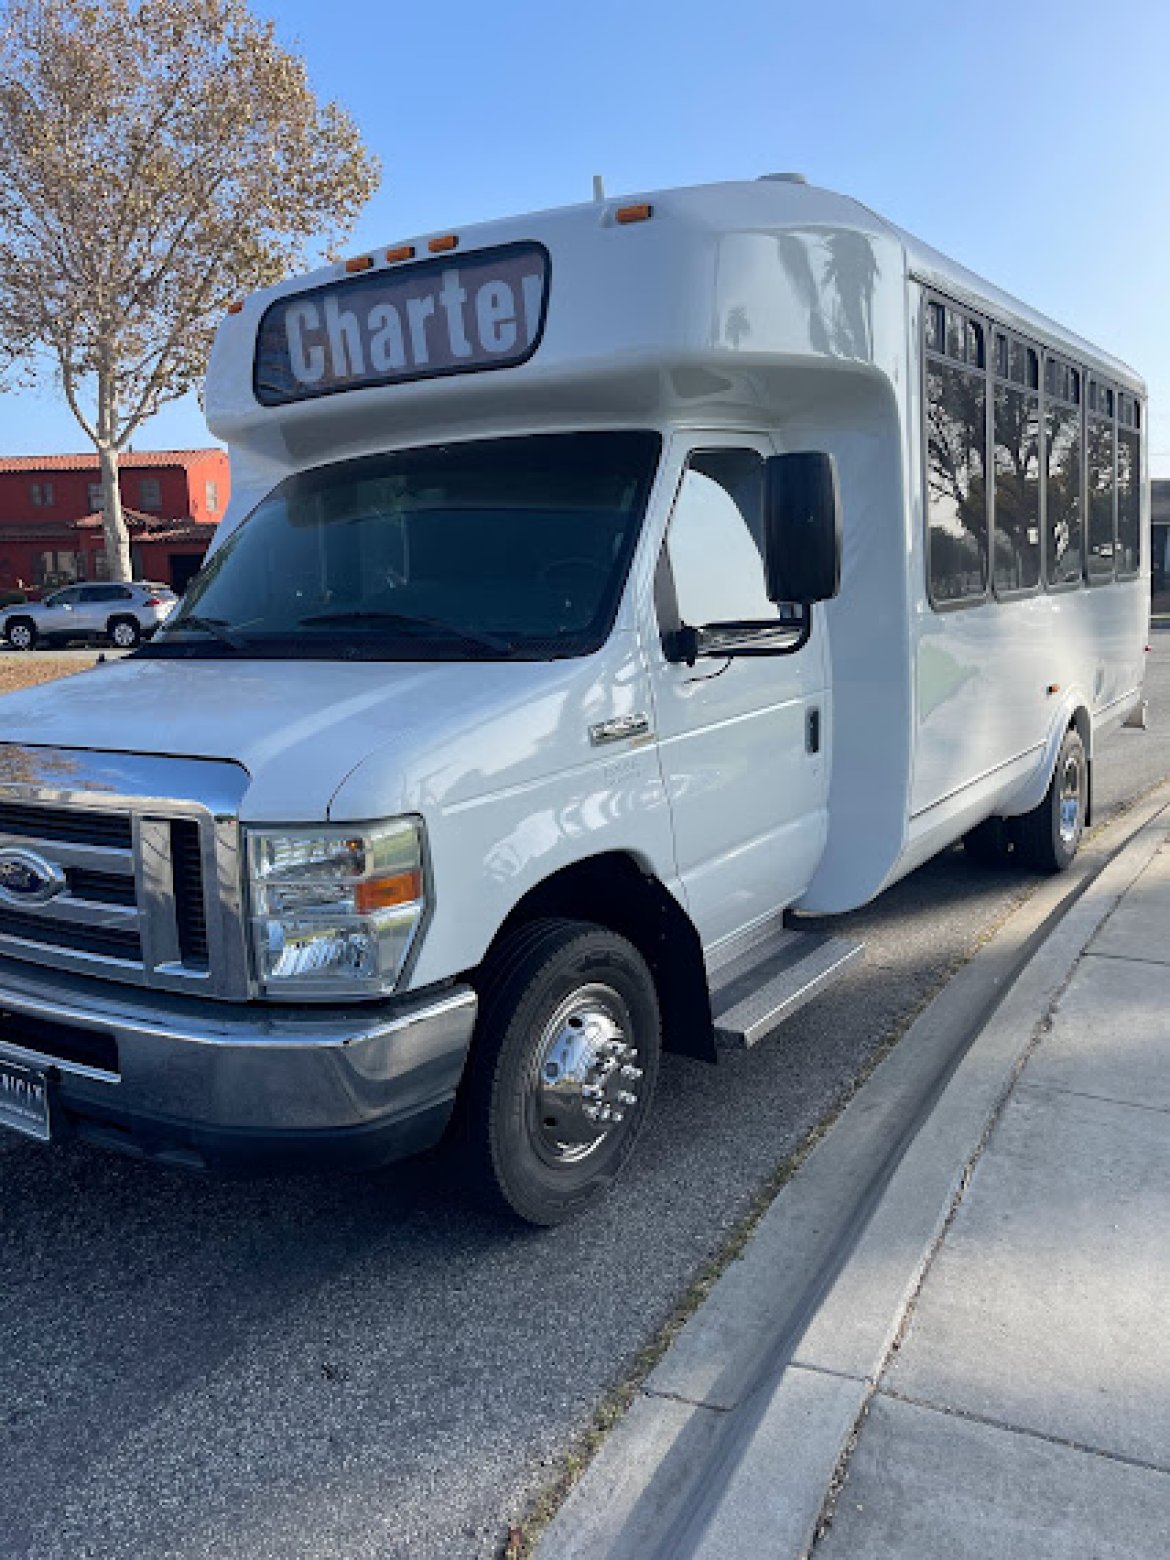 Details about   Ford E55 Party Bus Used Mobile Entertainment Vehicle for Sale in Tennessee!! 